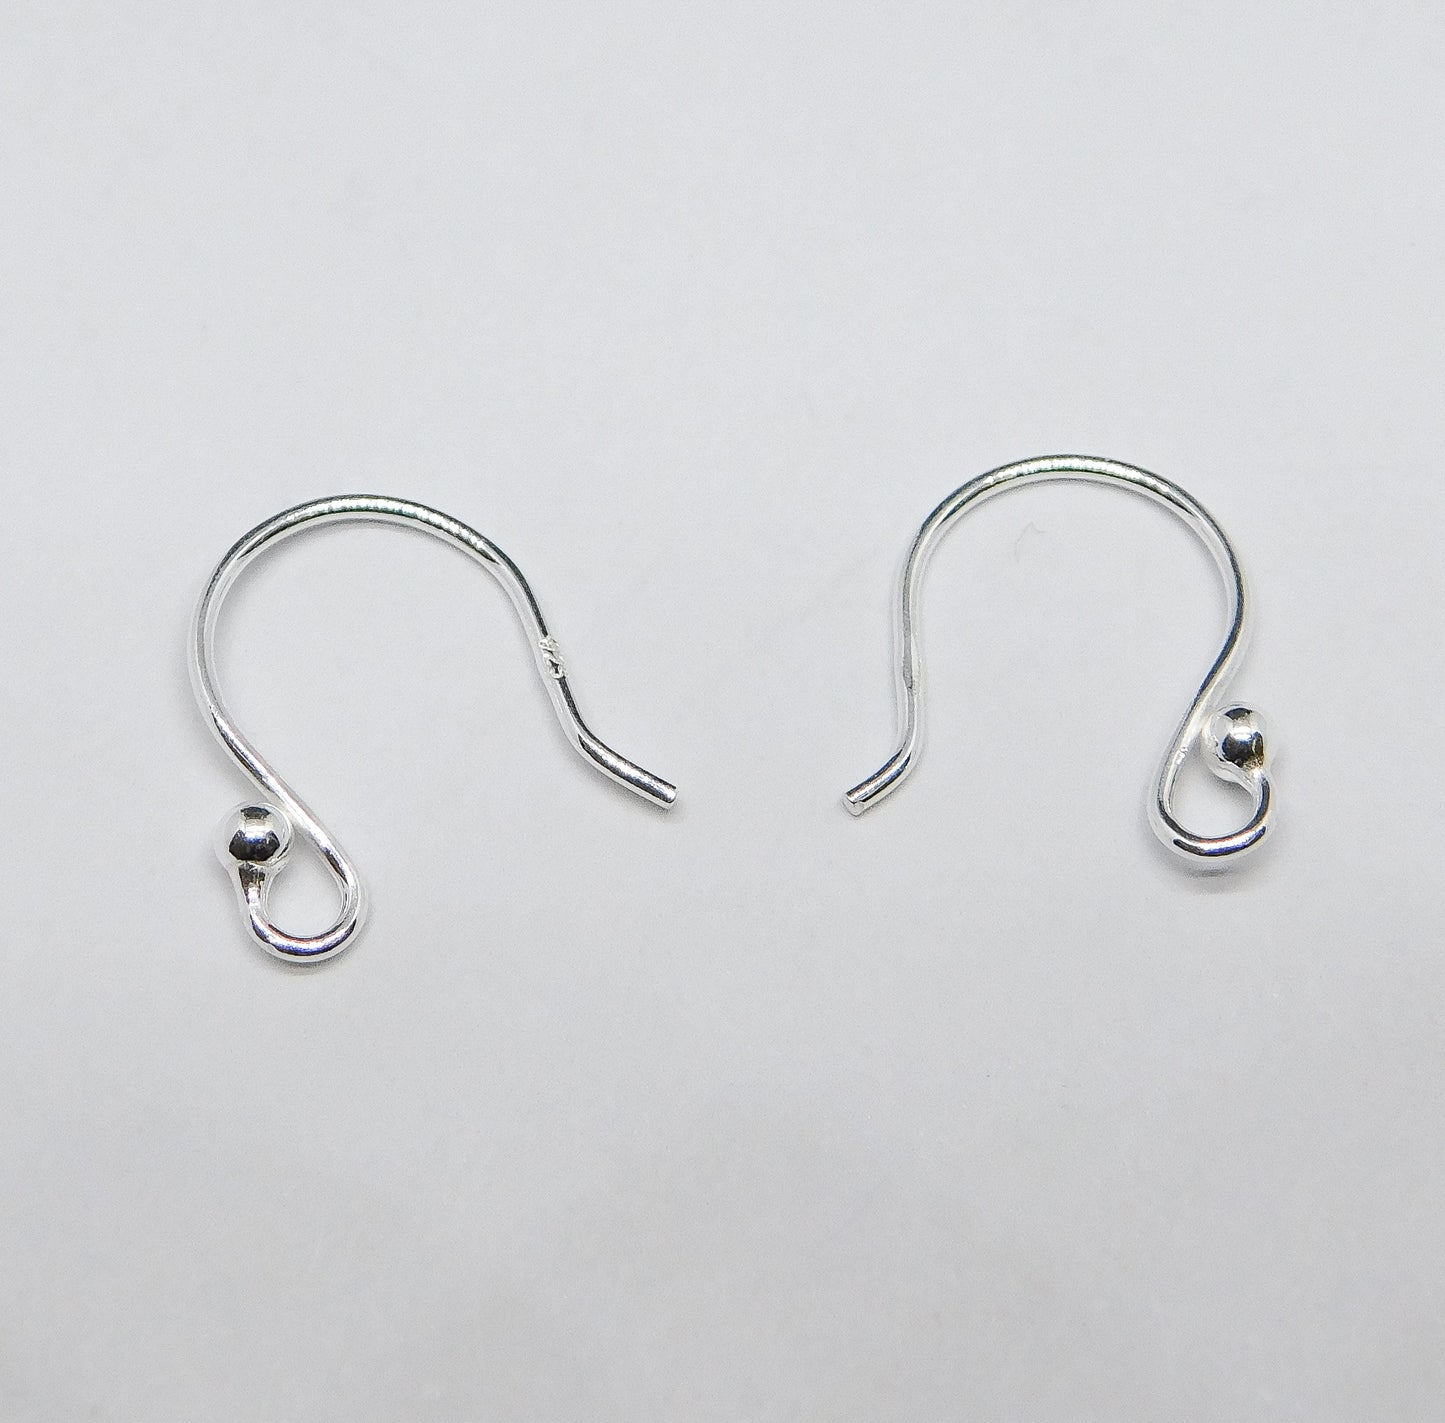 EAR WIRES WITH BEAD